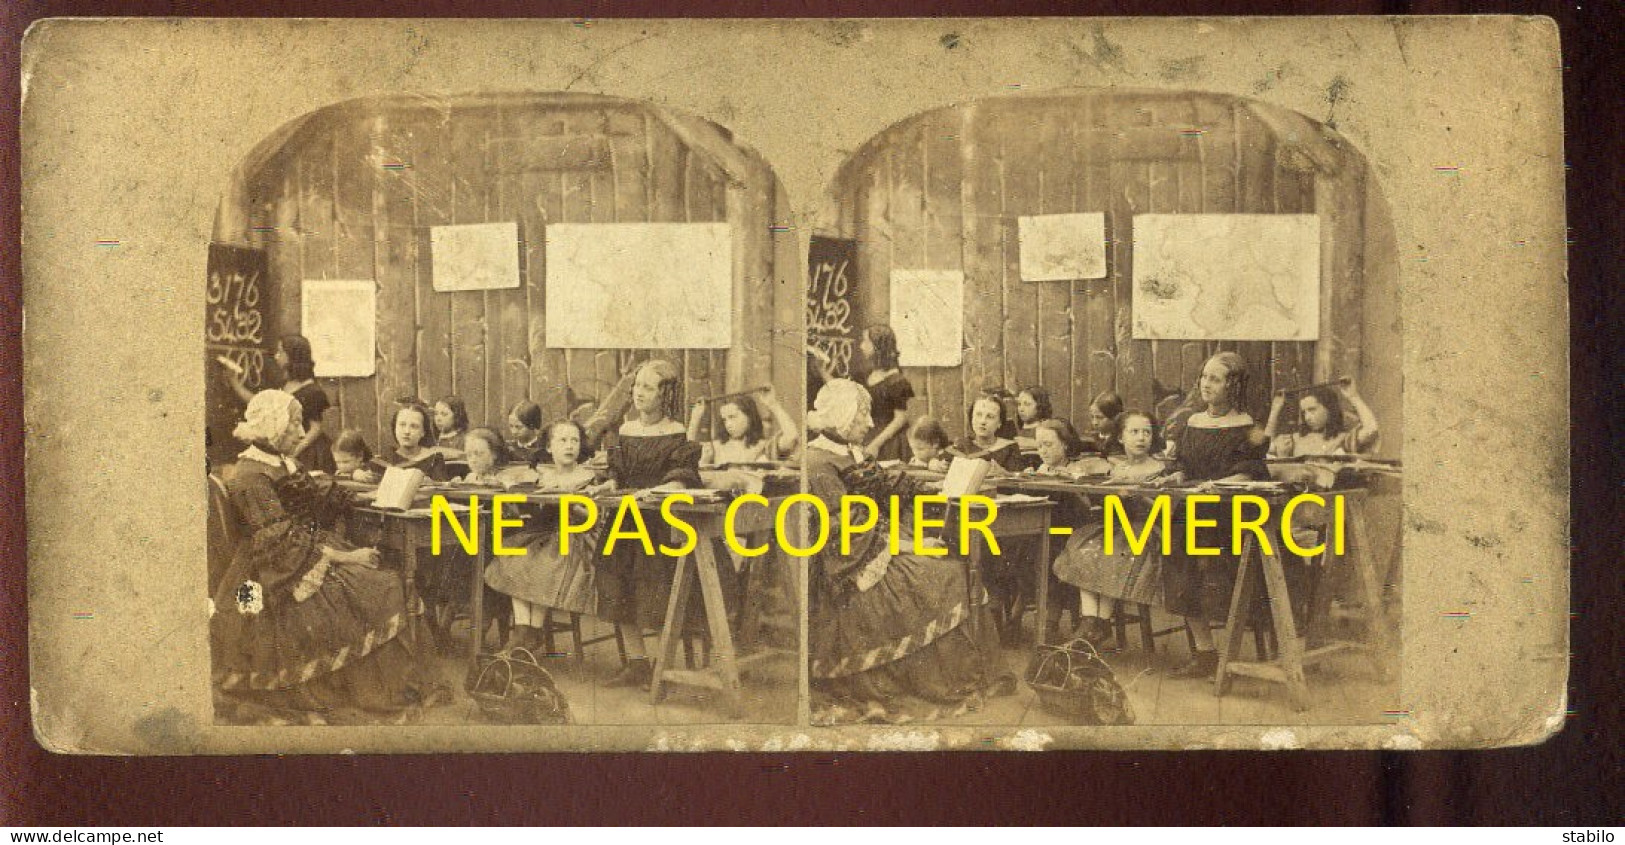 PHOTO STEREO - A L'ECOLE - FORMAT 17 X 8.5 CM  - Stereoscopic